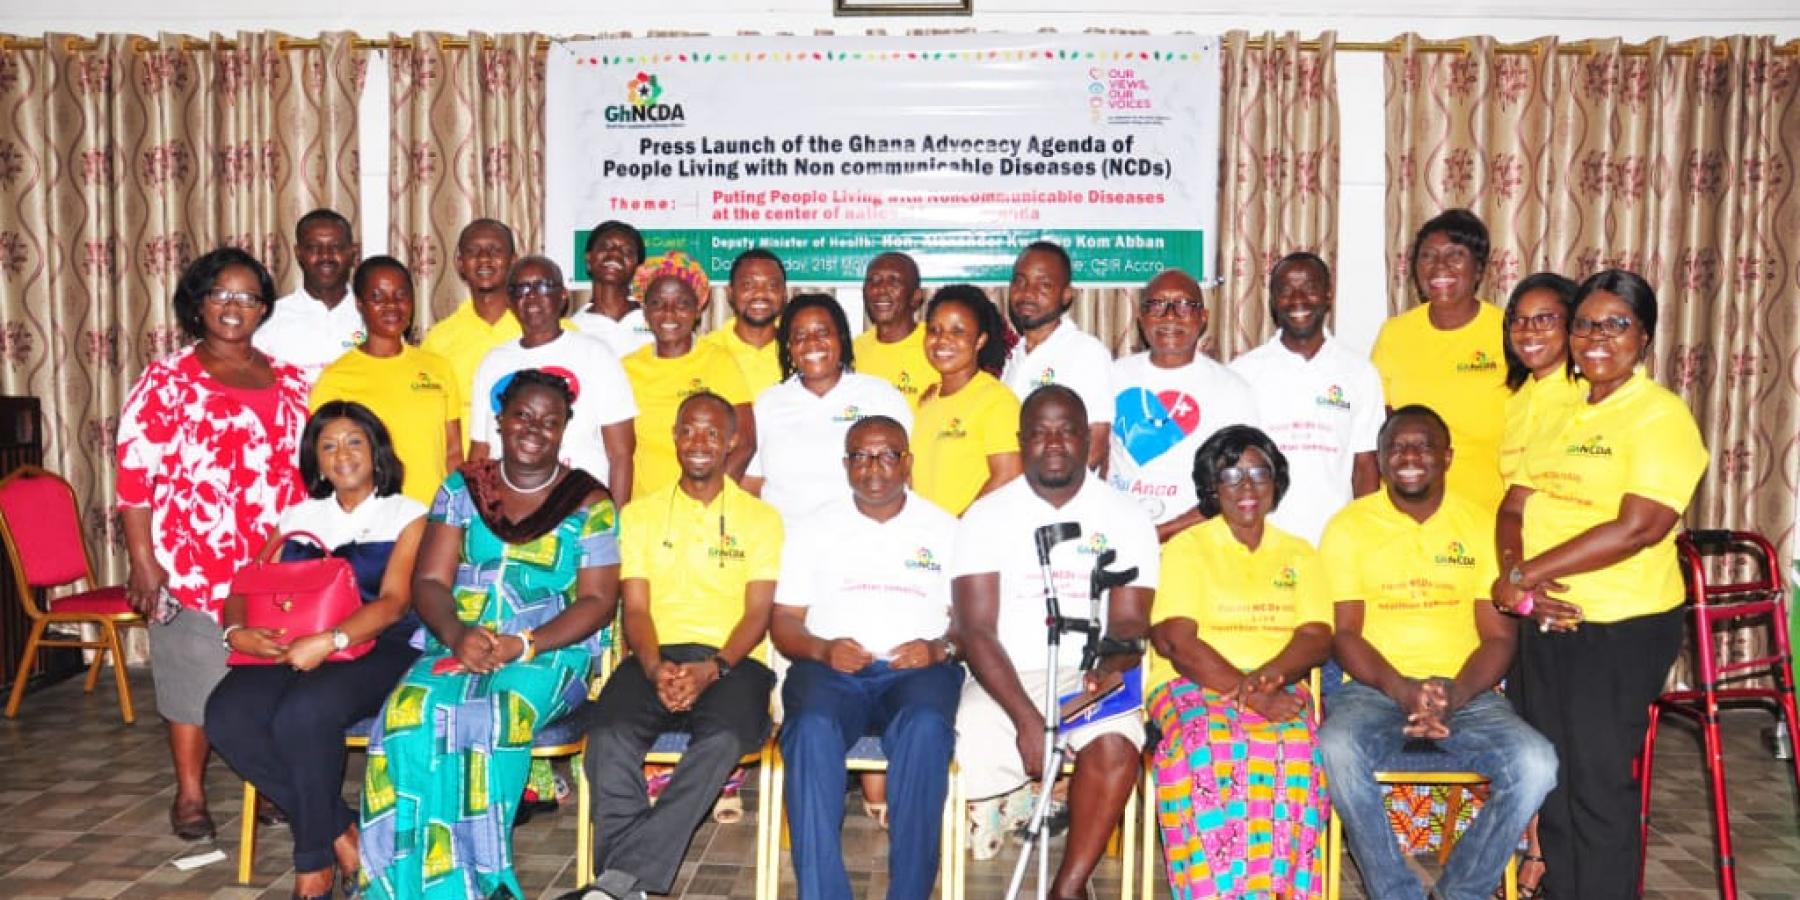 Launch of Ghana Advocacy Agenda of People Living with NCDs